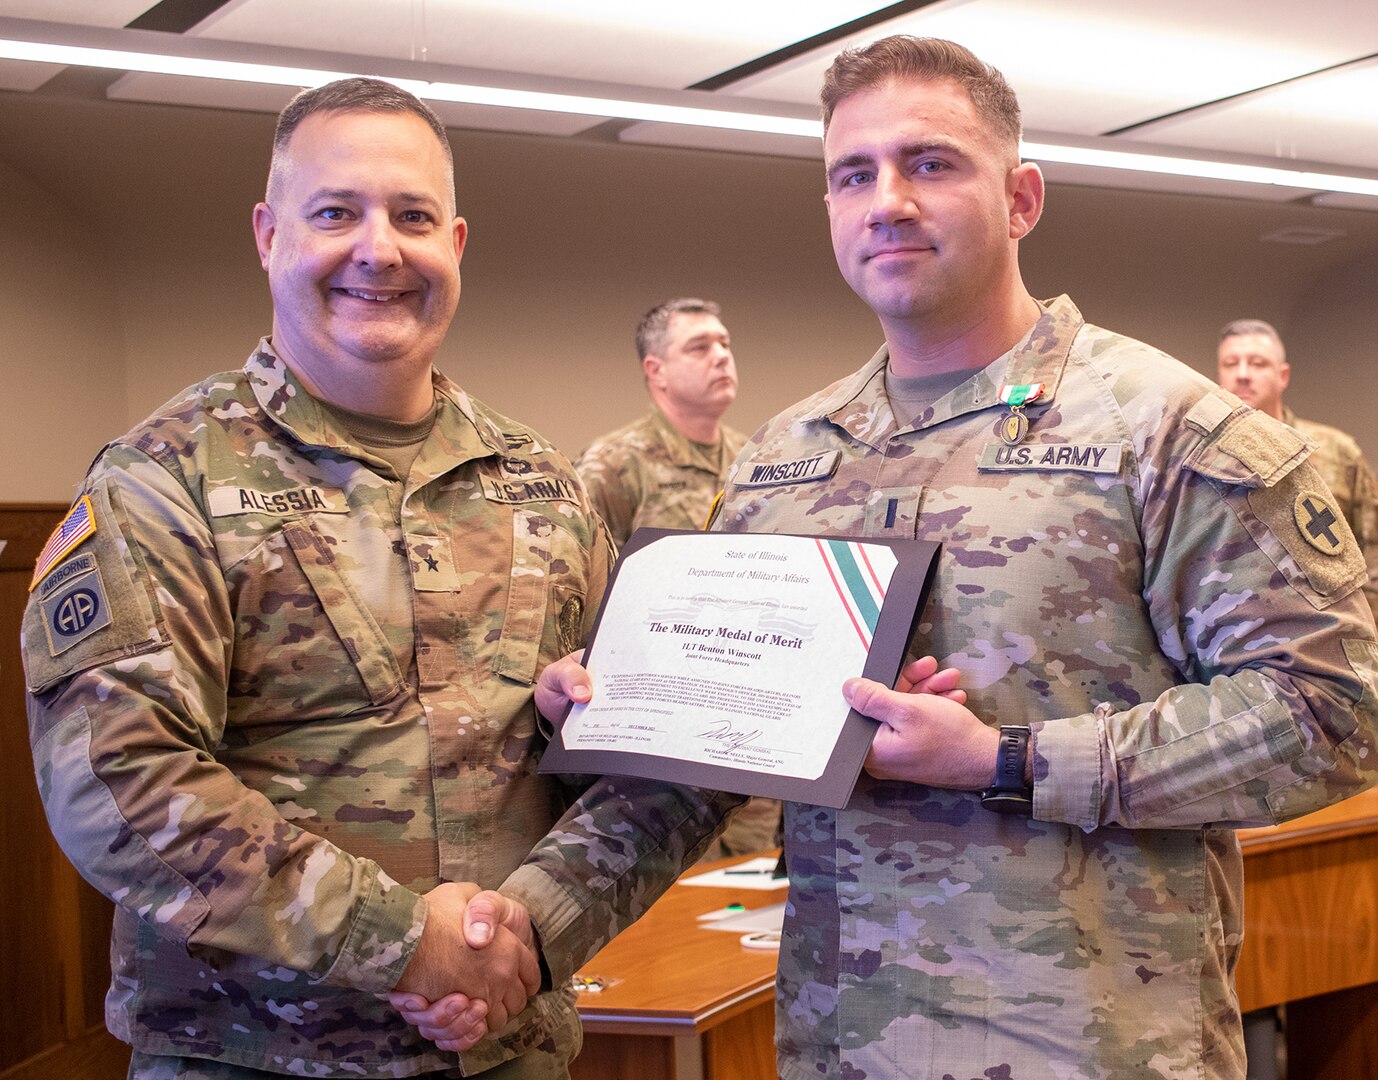 Brig. Gen. Mark Alessia, of Sherman, Illinois, Director of the Illinois National Guard Joint Staff, presents 1st Lt. Benton Winscott, of Chillicothe, Illinois, Strategic Plans and Policy Officer for the Illinois National Guard Joint Staff, with the Illinois Military Medal of Merit at a ceremony Dec. 5 at Joint Force Headquarters, Camp Lincoln, Springfield, Illinois.